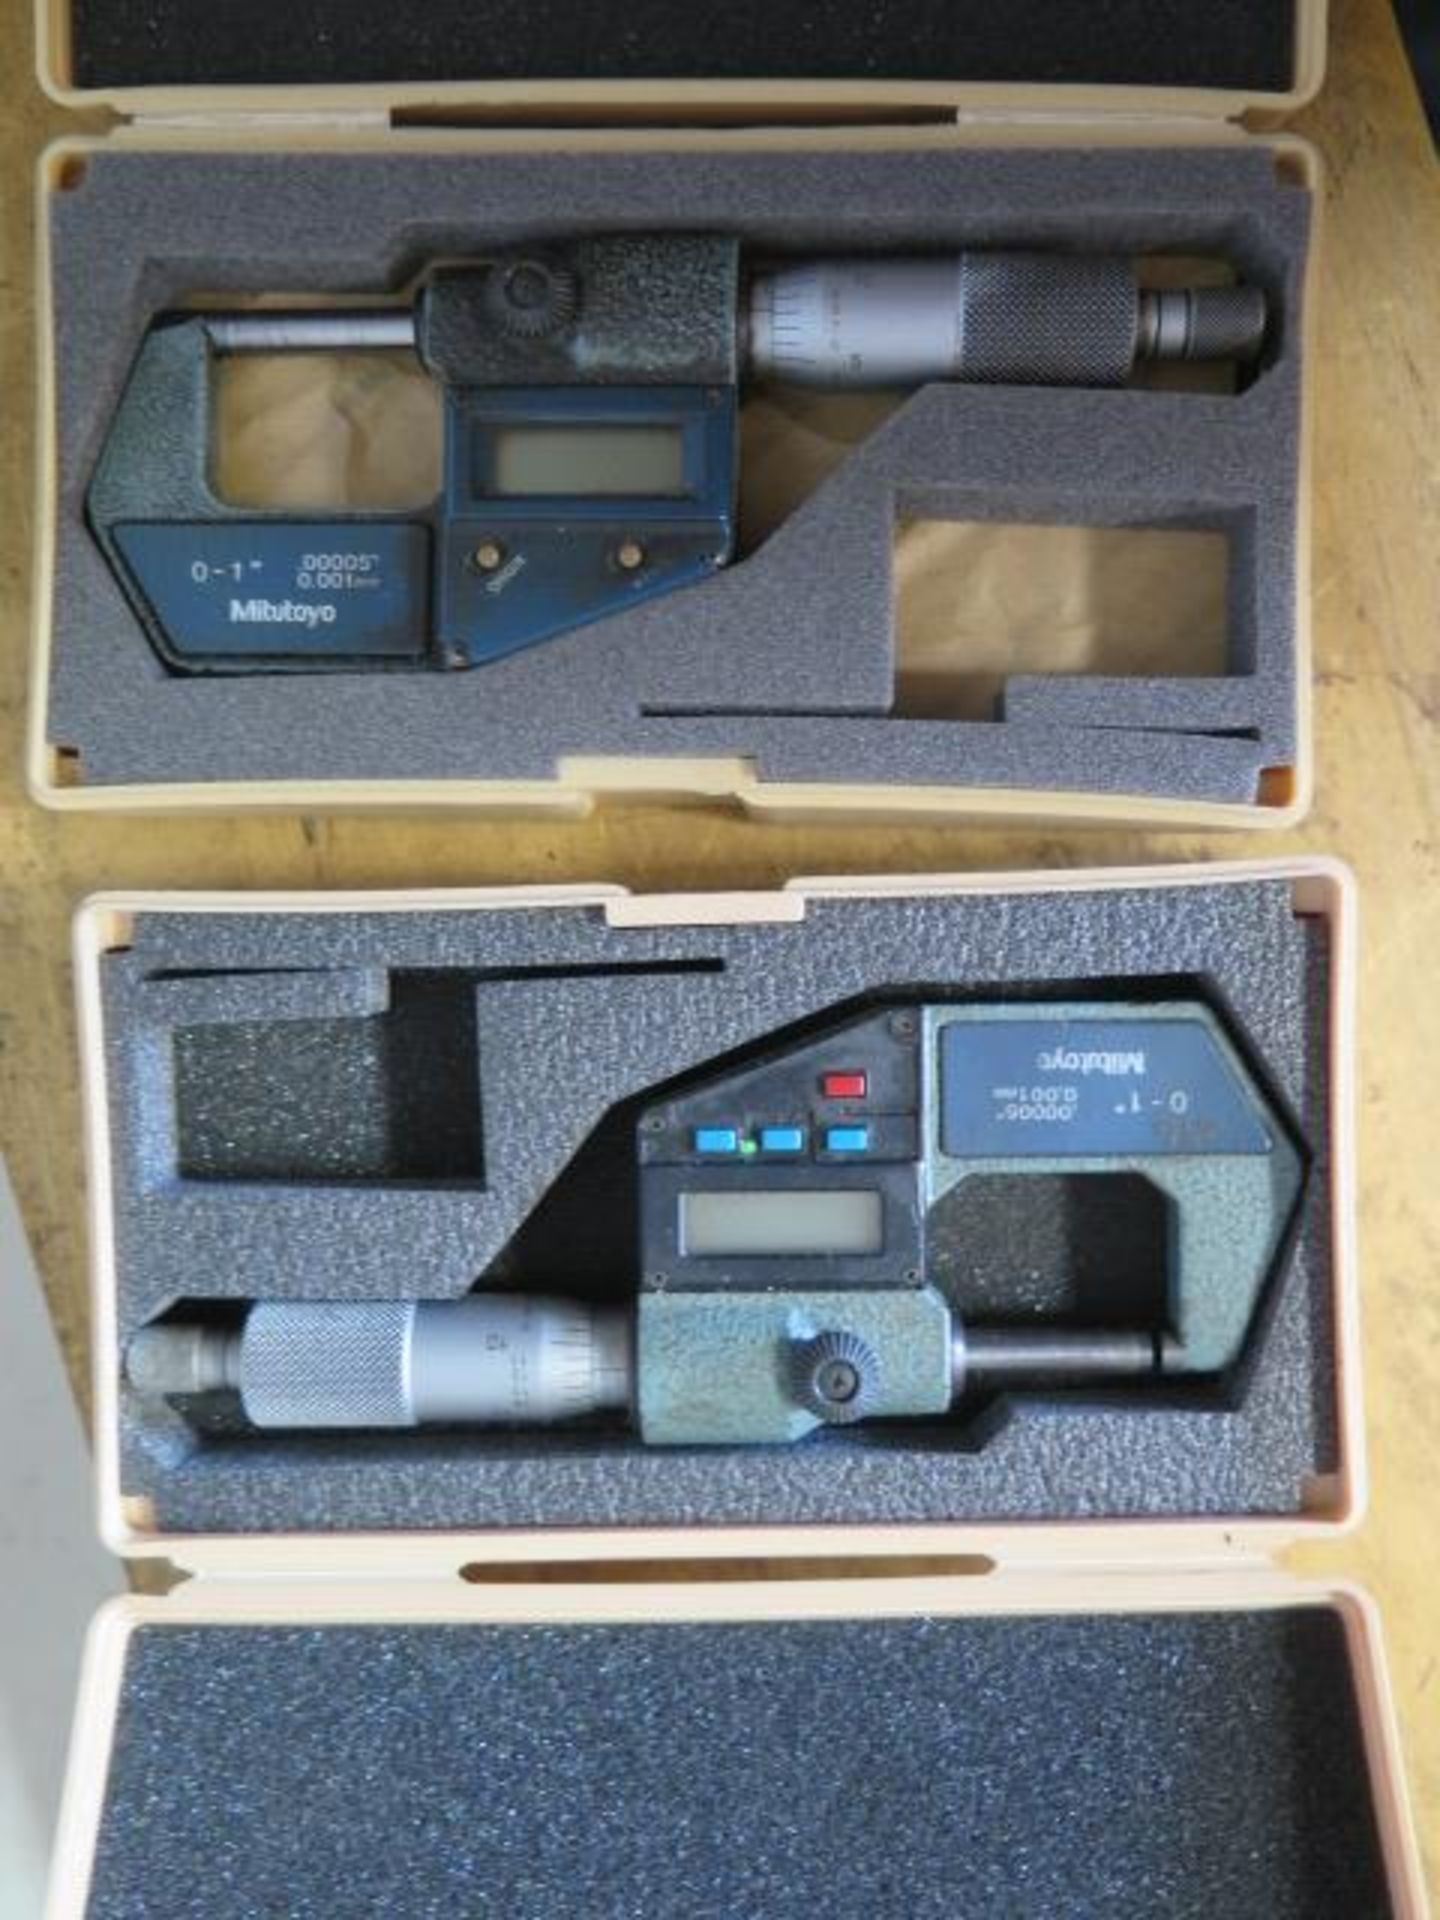 Mitutoyo and Brown & Sharpe 0-1" Digital OD Mics (4) (SOLD AS-IS - NO WARRANTY) - Image 3 of 3